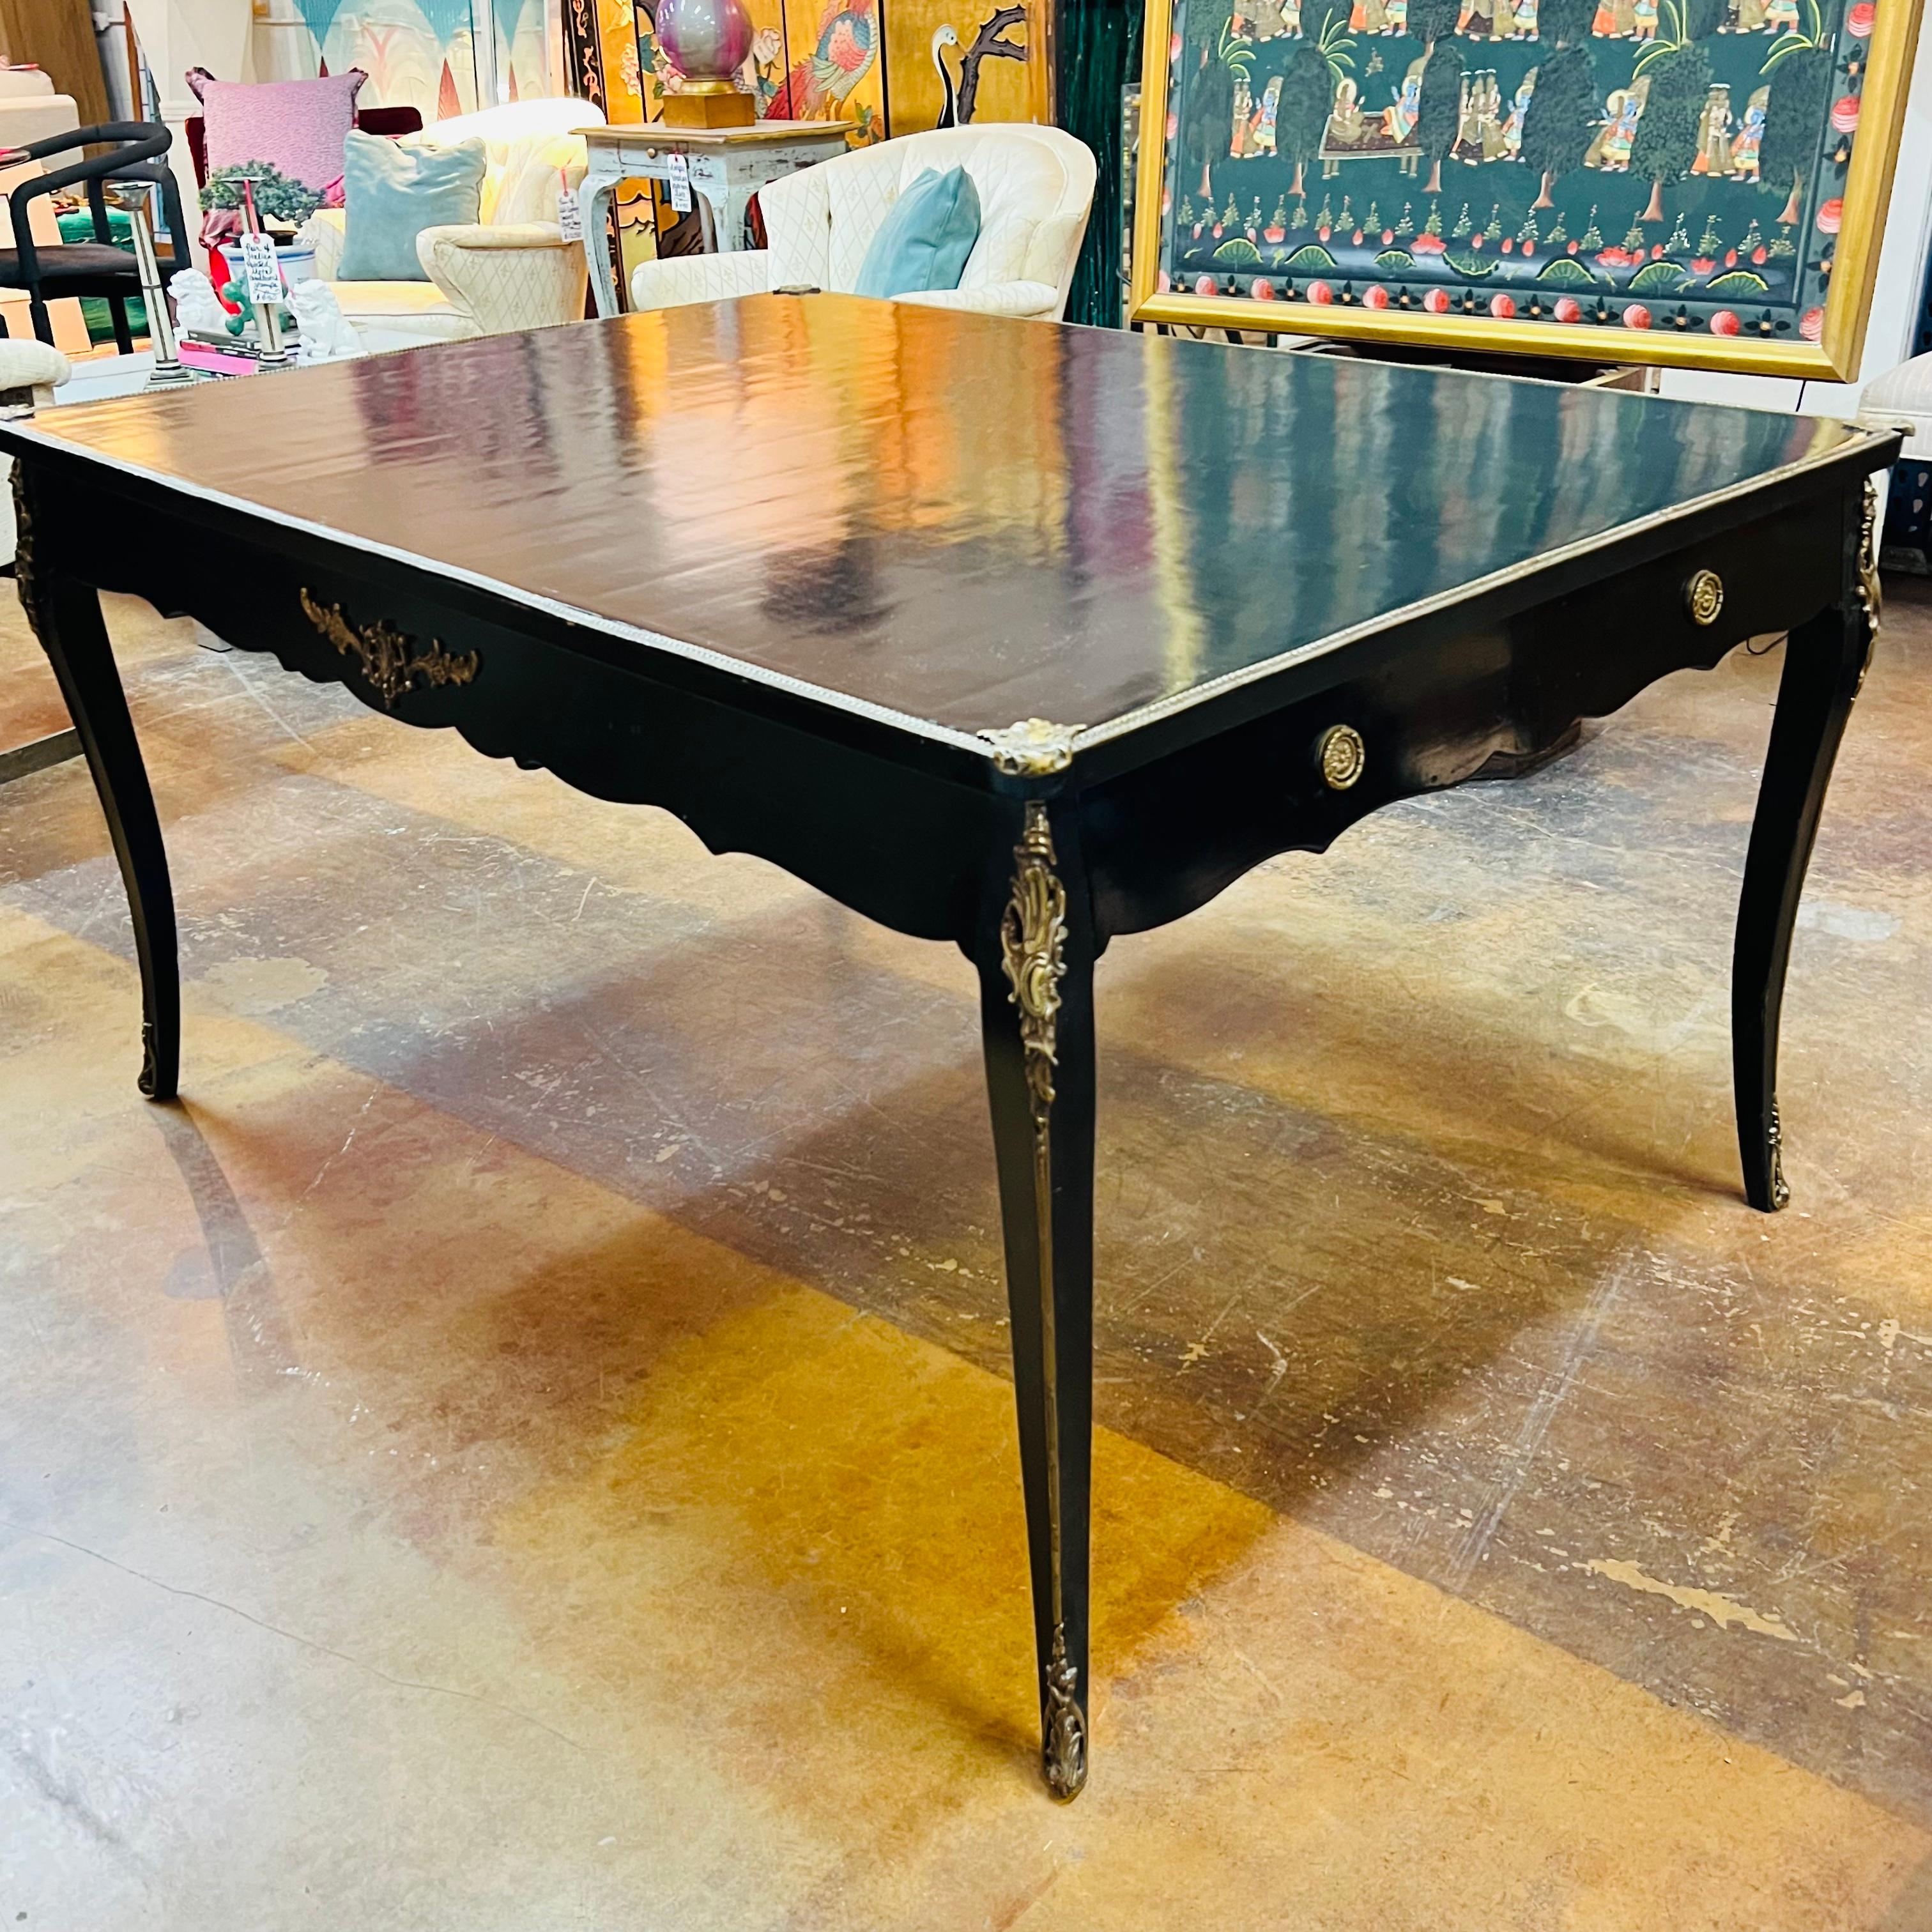 French Louis XV writing desk featuring cabriole legs, exquisite ormolu, and a glossy black lacquered top. The elegant gilt bronze fittings protect the edges and at the same time accentuate them. The table has two drawers at each side. Previously